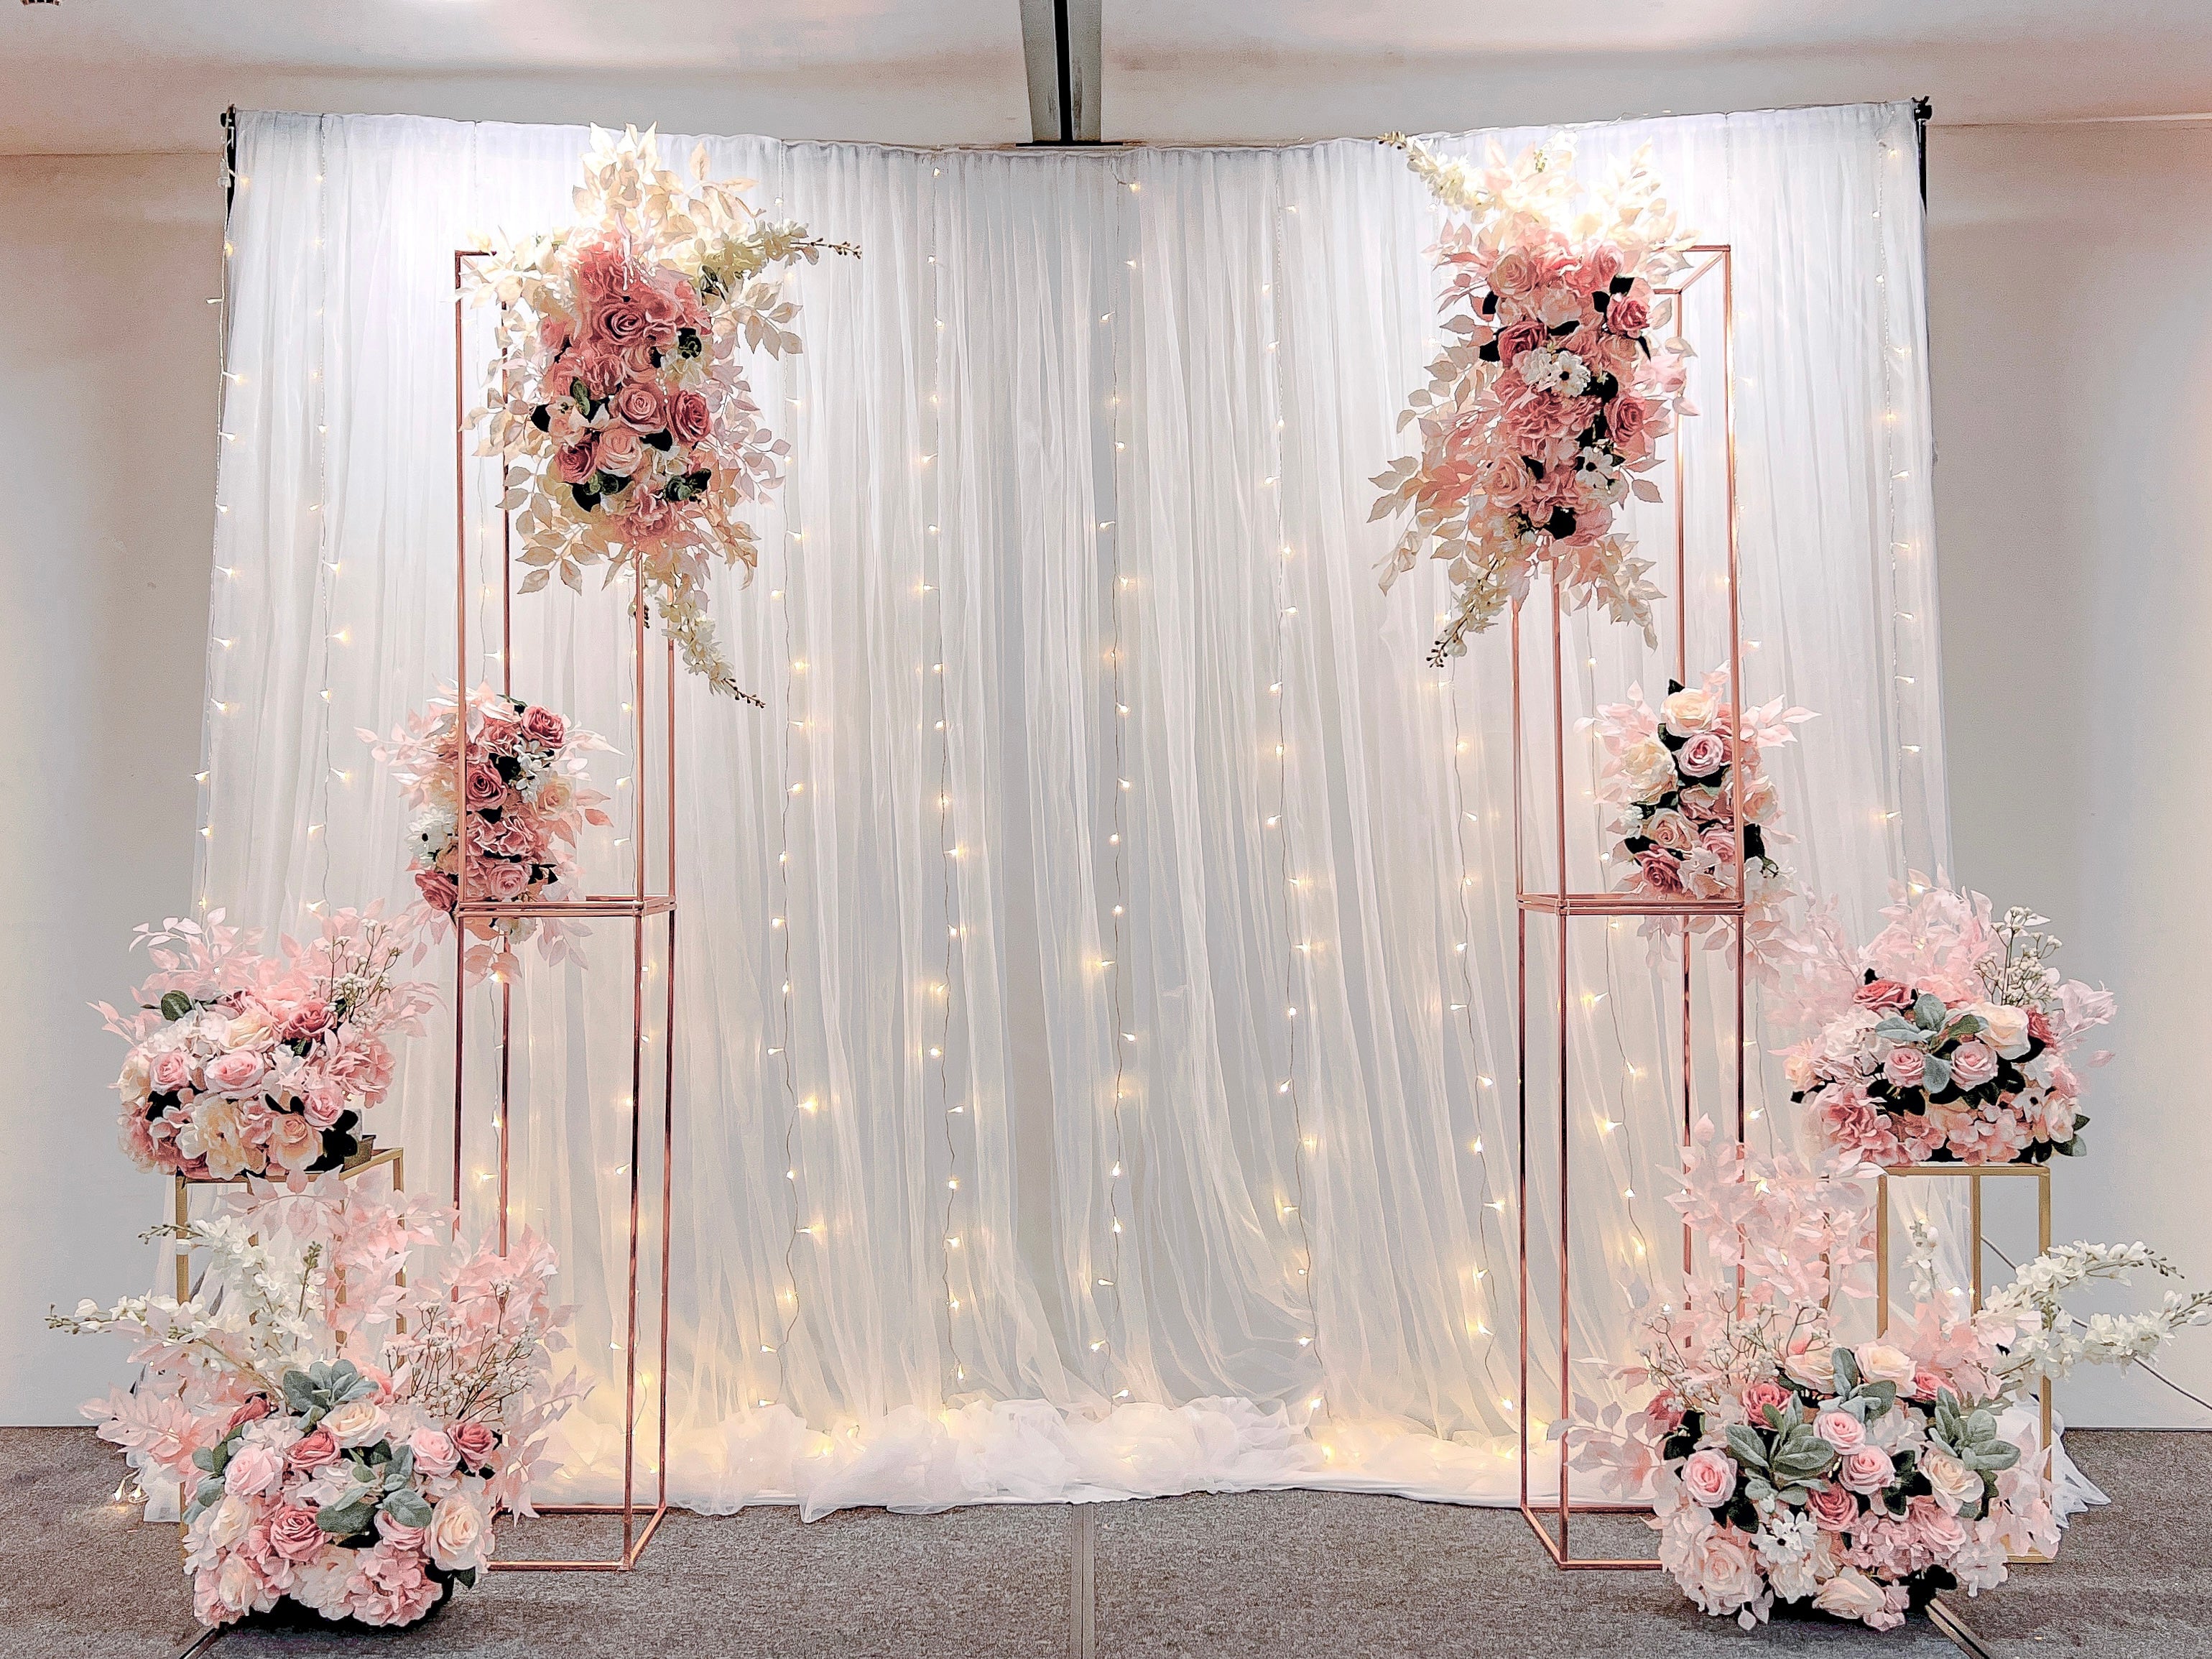 Wedding/ Solemnisation Decor in Singapore -Pink White Peach Floral Column Arch w. Fairylights Backdrop suitable for Indoor/Outdoor